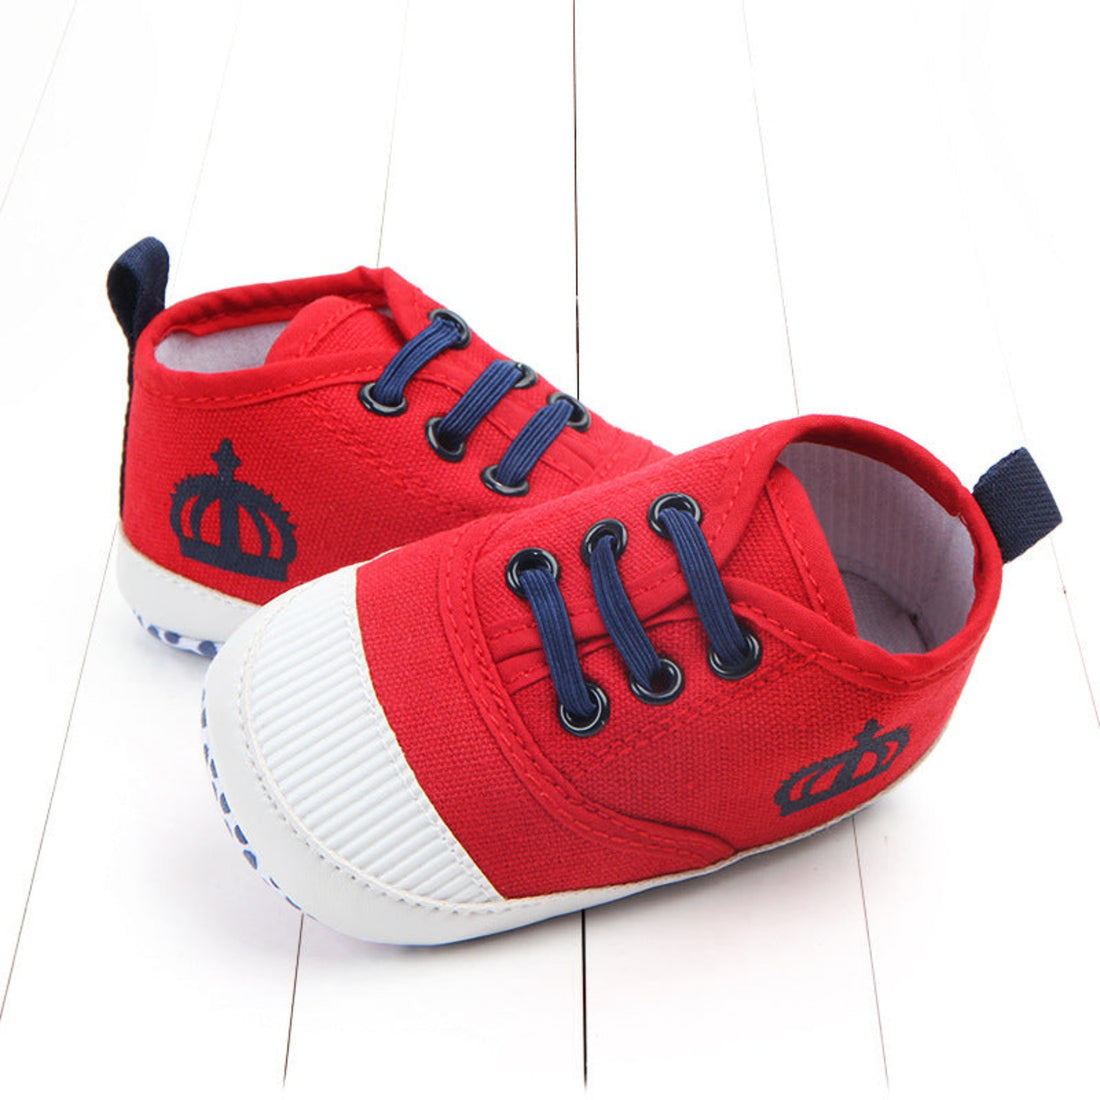 Canvas baby shoes in red color